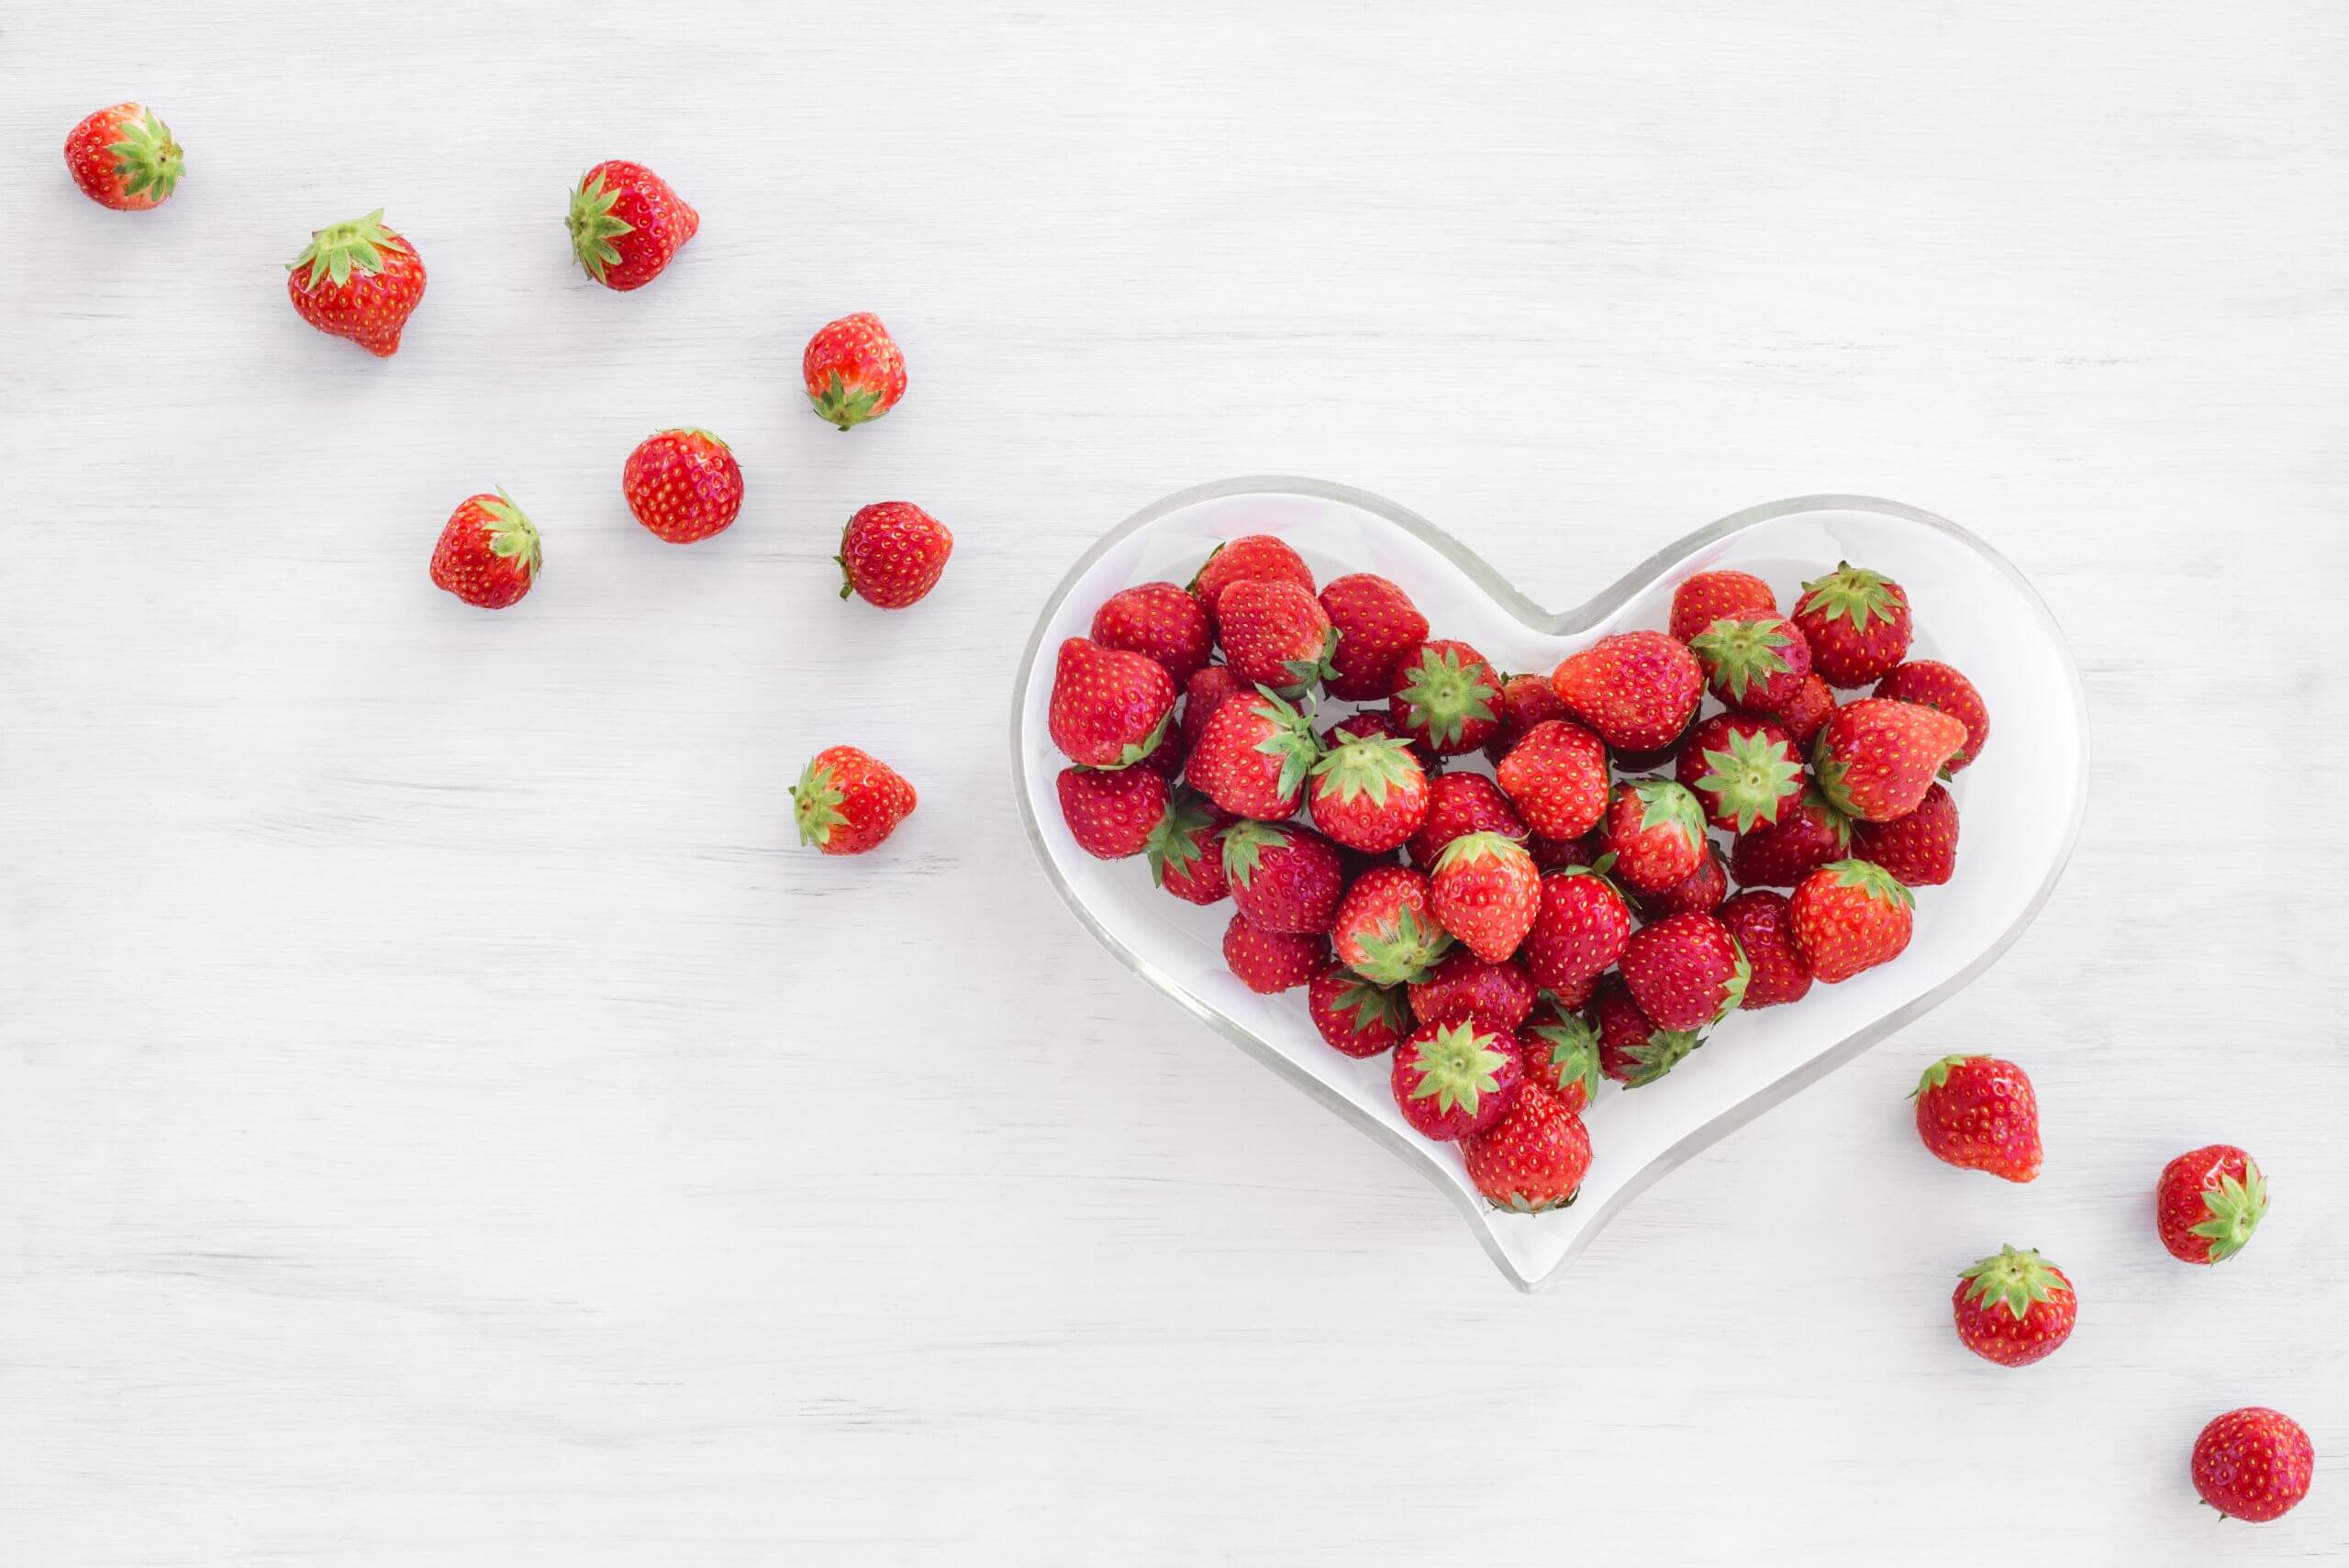 Strawberries in a heart-shaped bowl, on white wooden background.